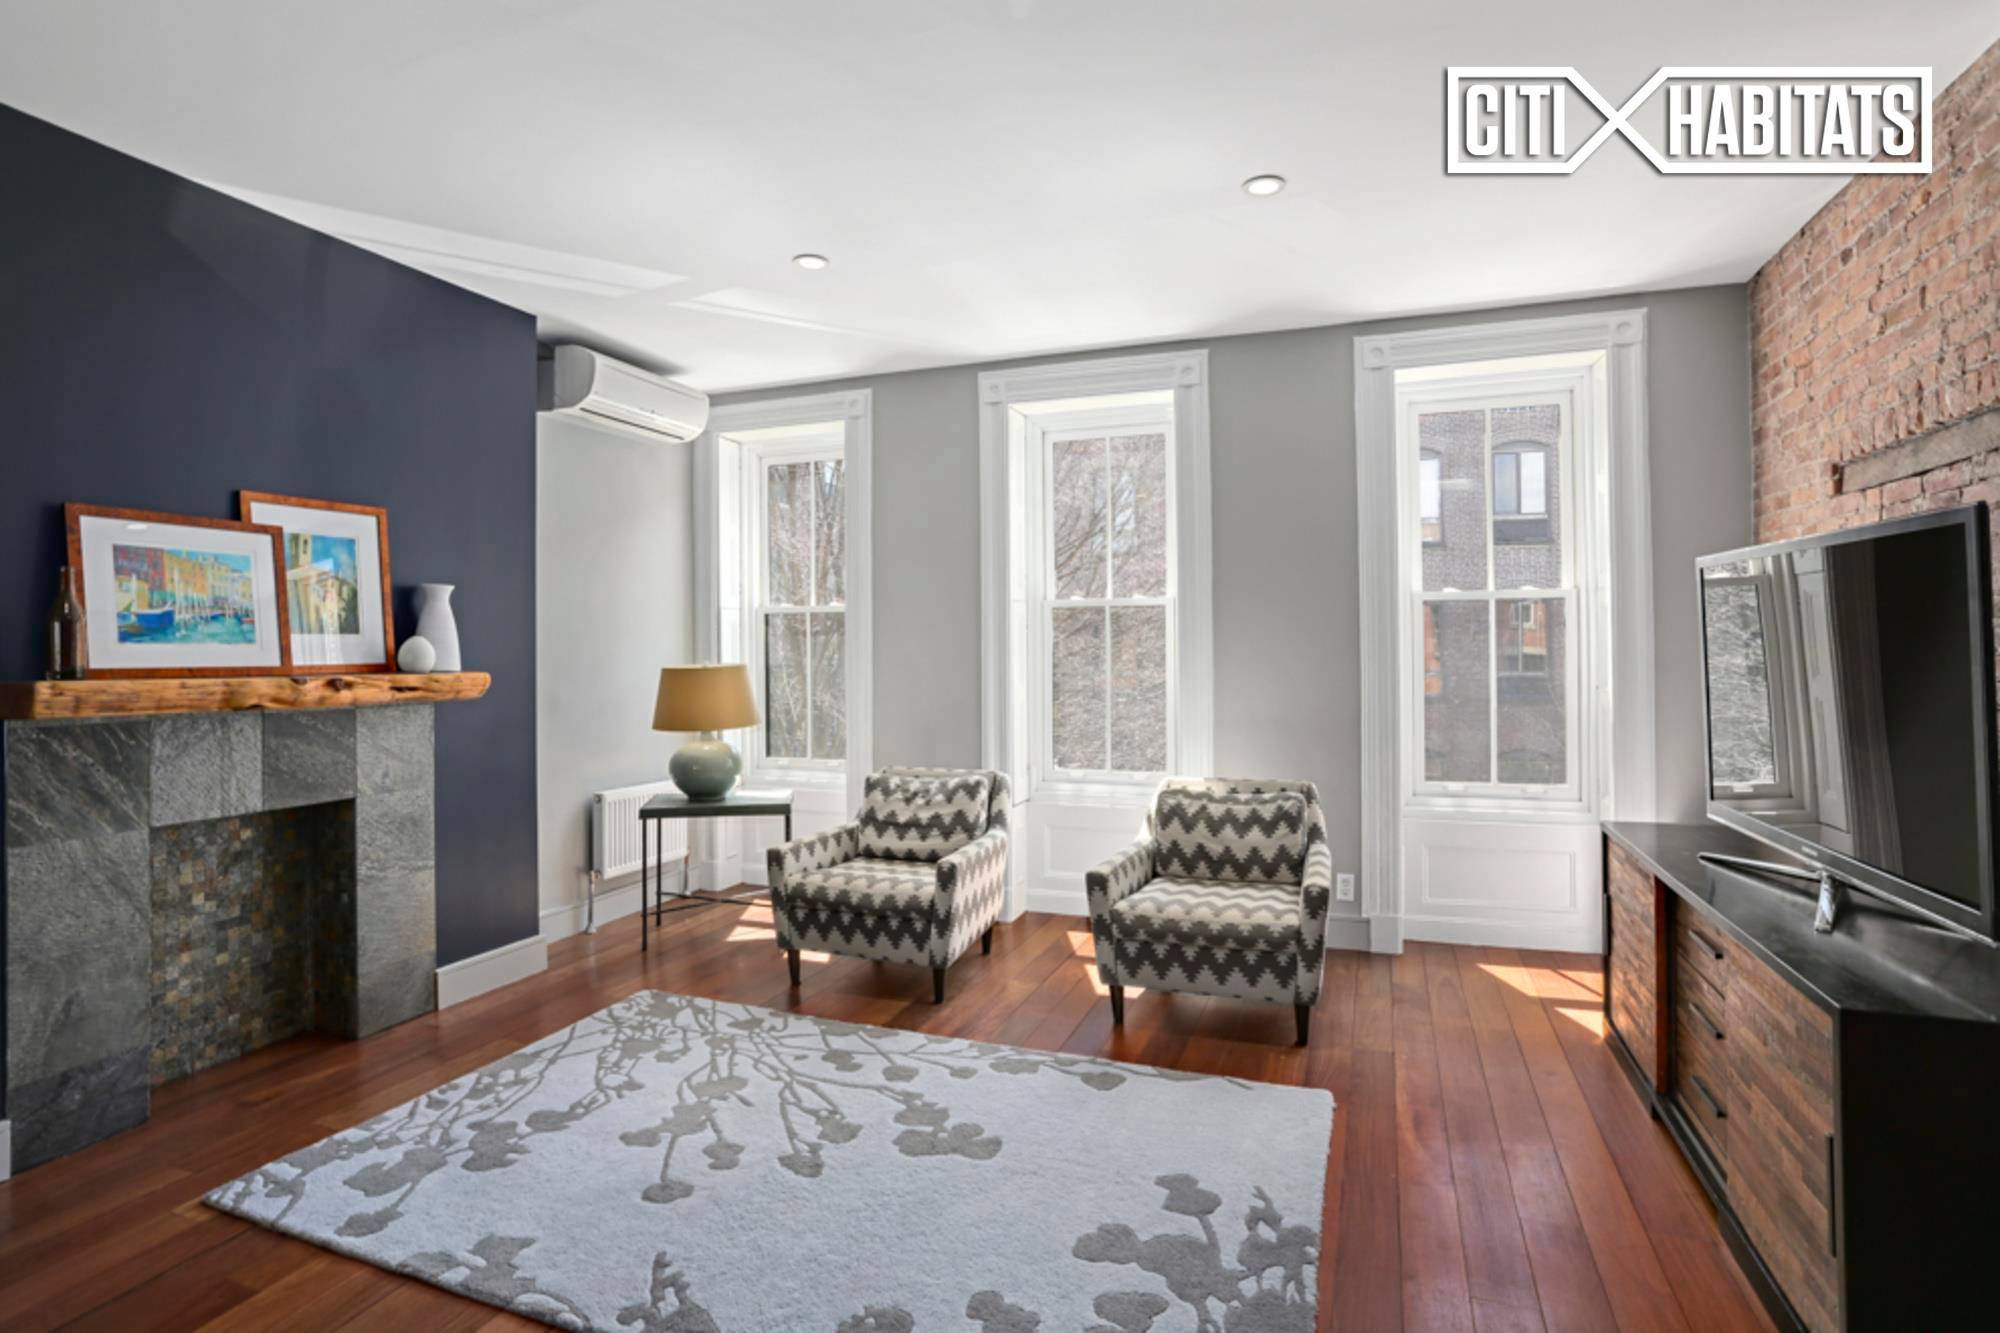 Located in Park Slope, two blocks from Prospect Park, this stunning single family brownstone combines the convenience of contemporary appliances and finishes with charm and accents throughout.